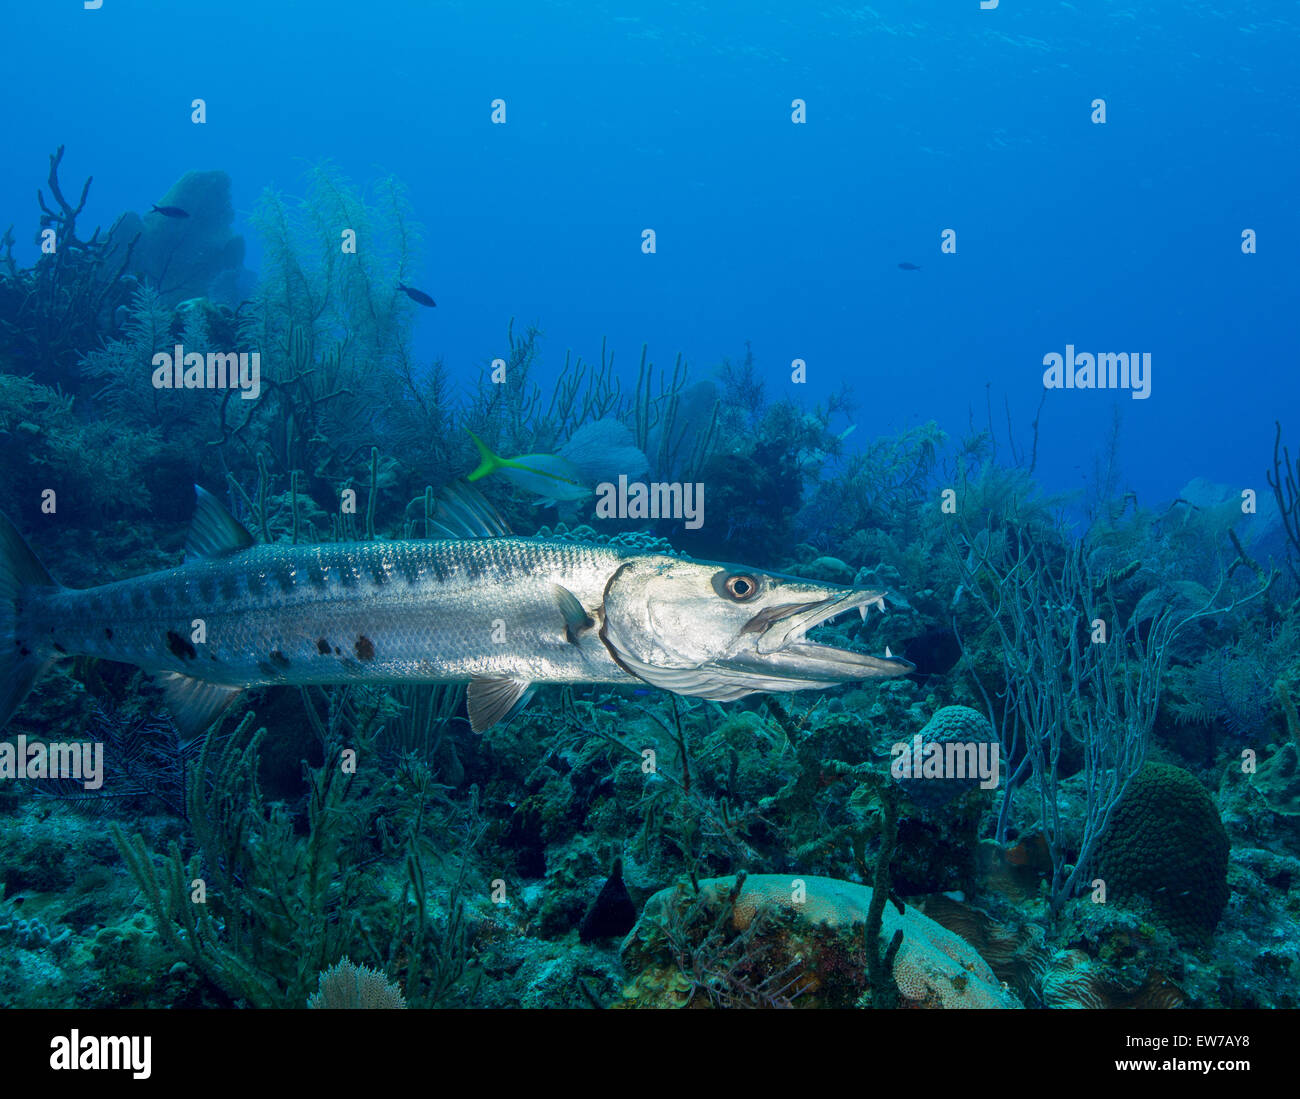 Barracuda with open mouth. Stock Photo